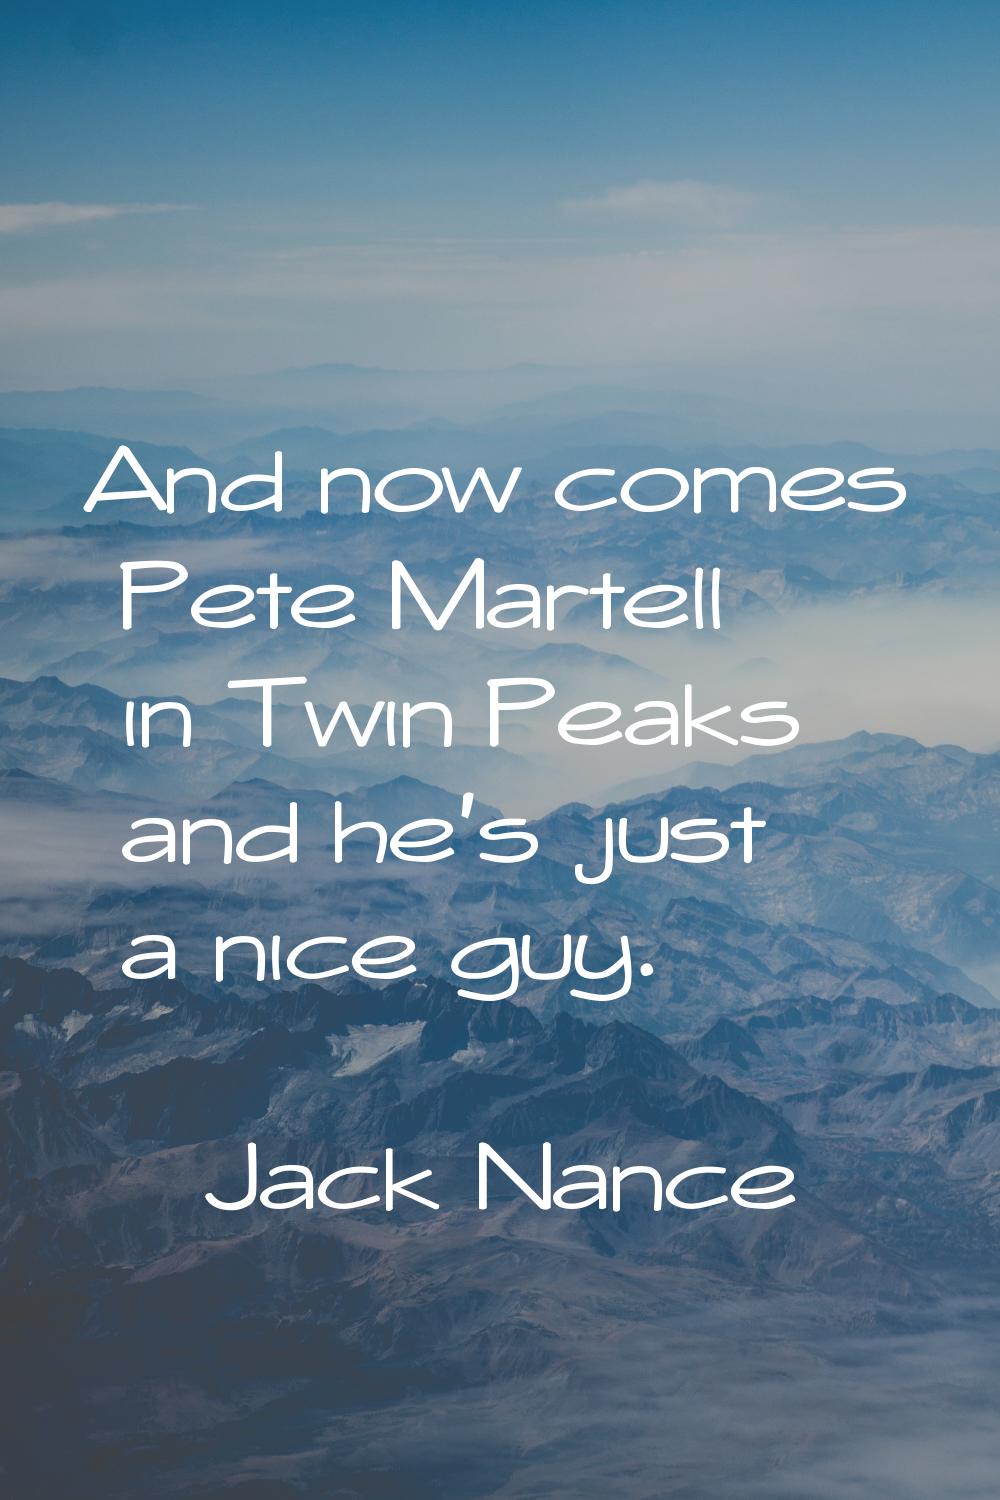 And now comes Pete Martell in Twin Peaks and he's just a nice guy.